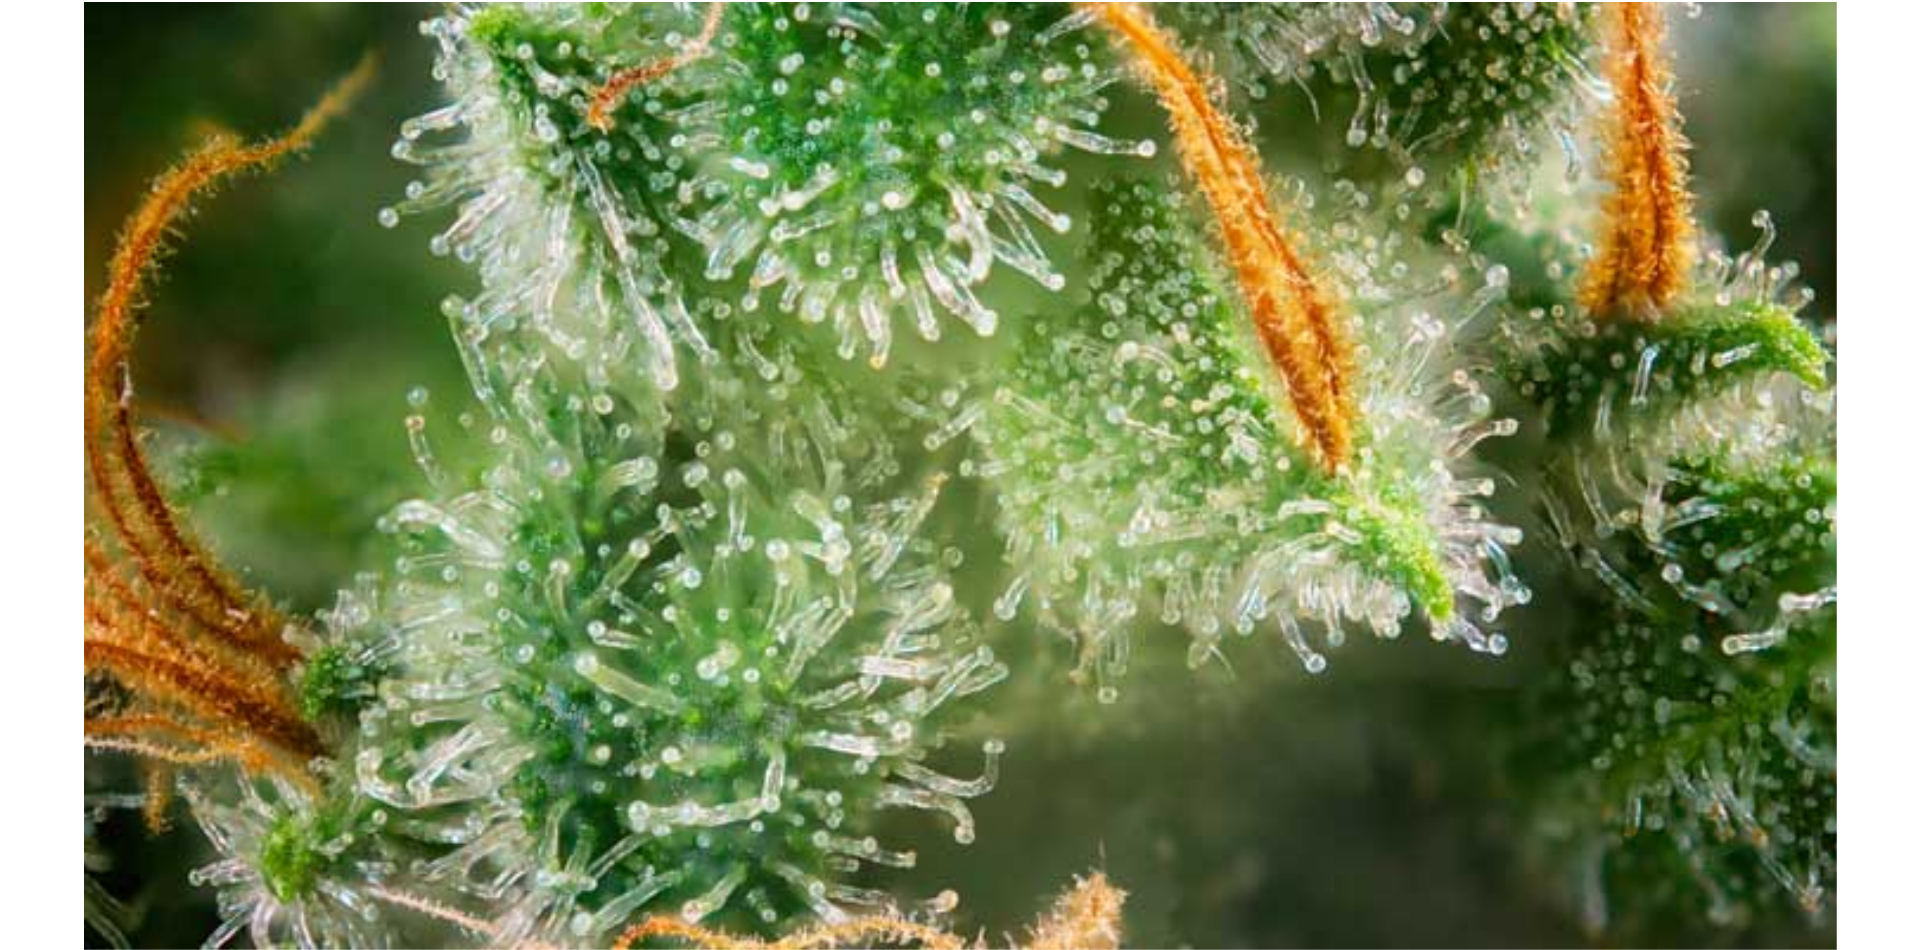 7 Ways to Increase Terpene Levels in Cannabis